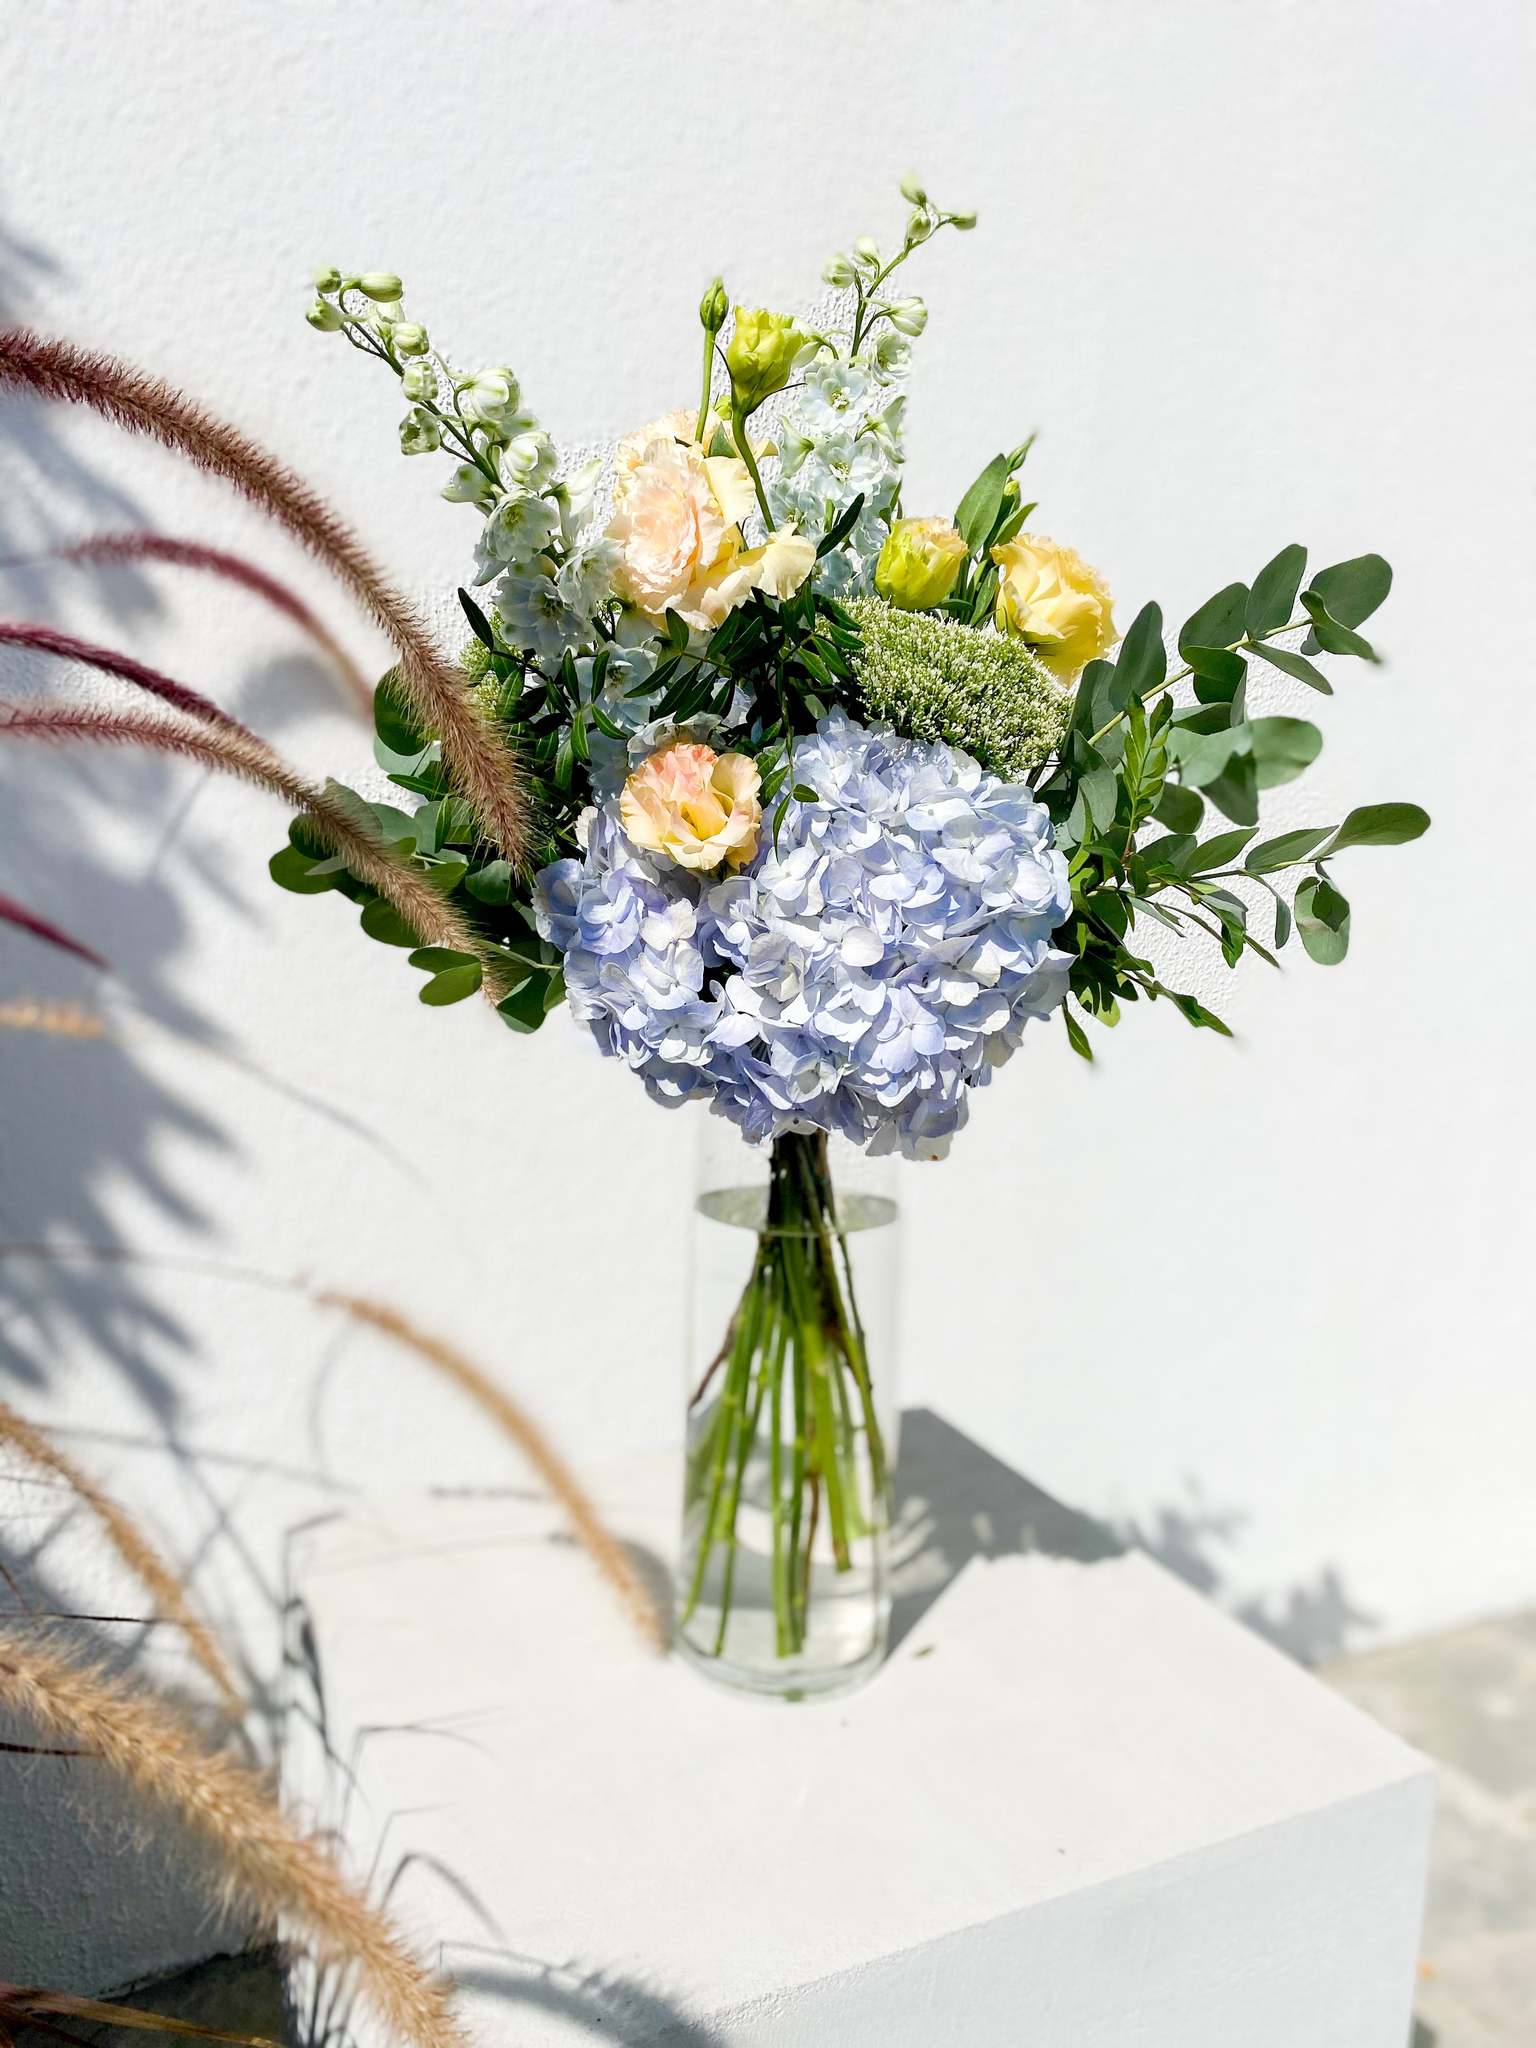 Valentine bouquet by Margot Floral Design. A fresh flower bouquet composed of Pale Yellow Roses, White Delphinium, Blue Hydrangea, and Eucalyptus. Small Size.